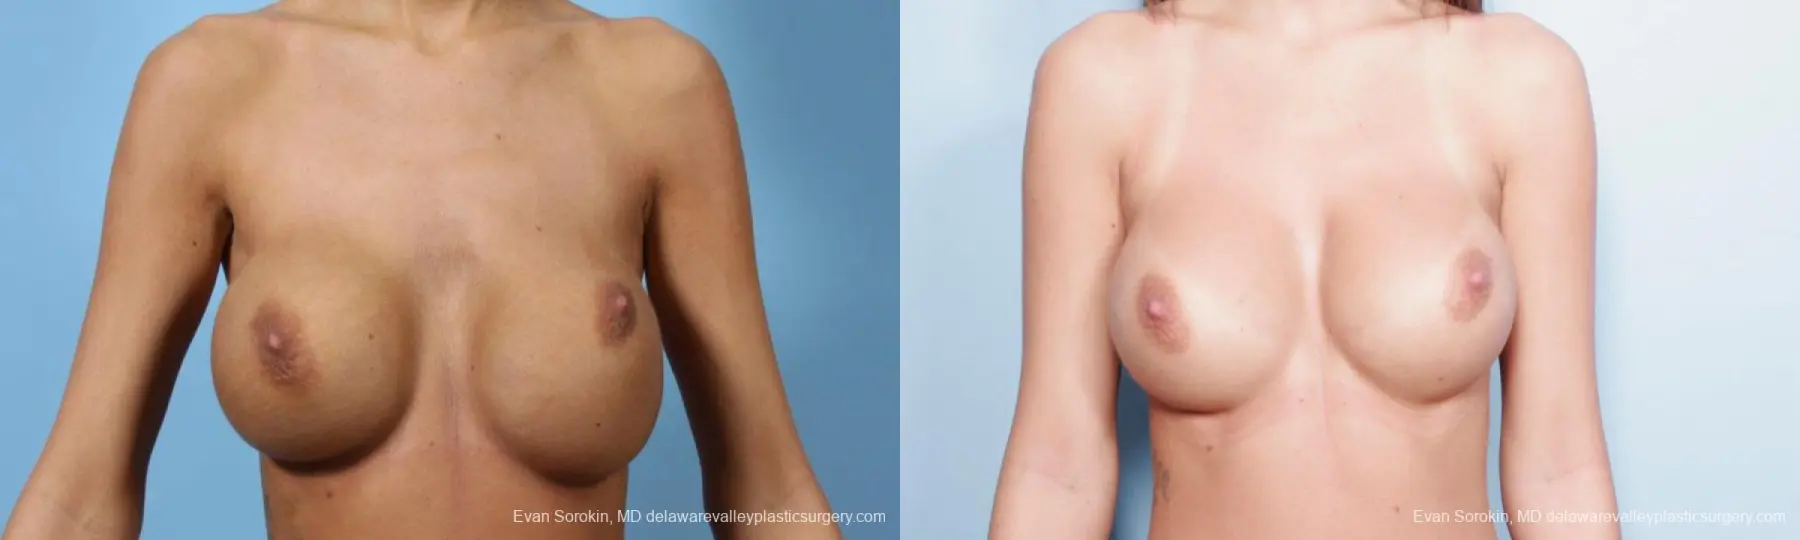 Philadelphia Breast Augmentation 9445 - Before and After